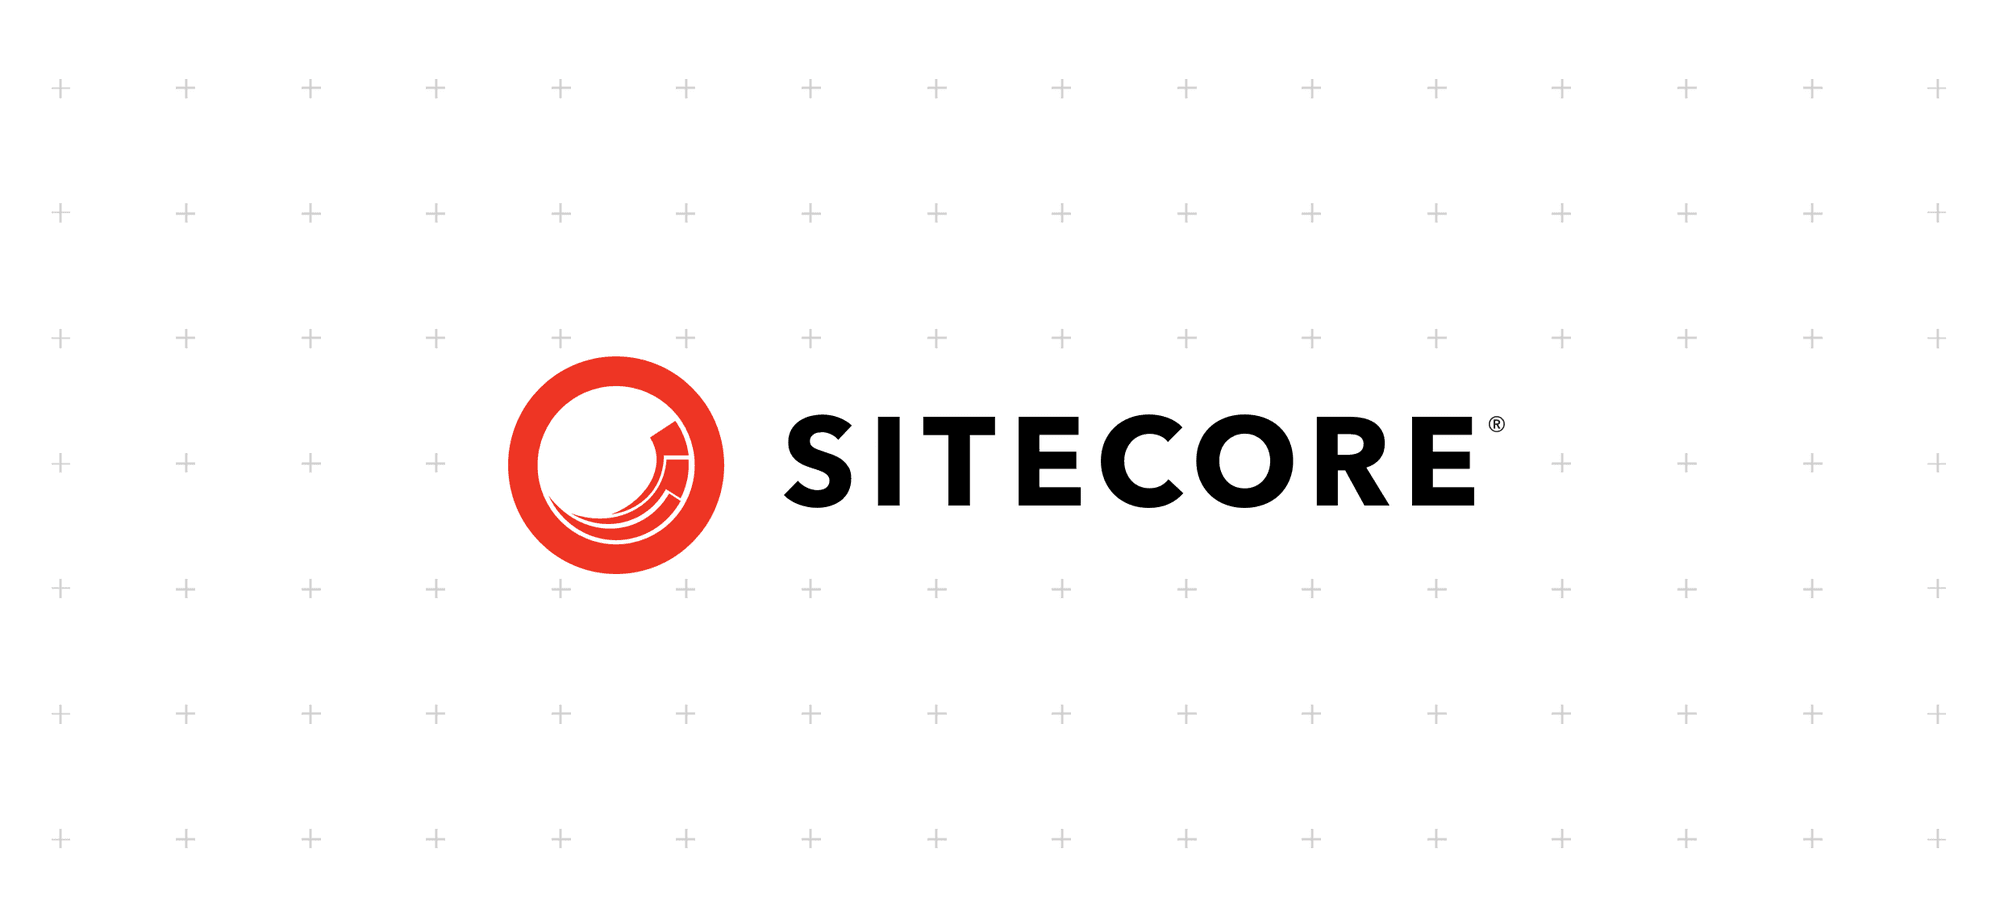 Not Just a Large Enterprise Player: Sitecore Brings Value to Small Businesses As Well!